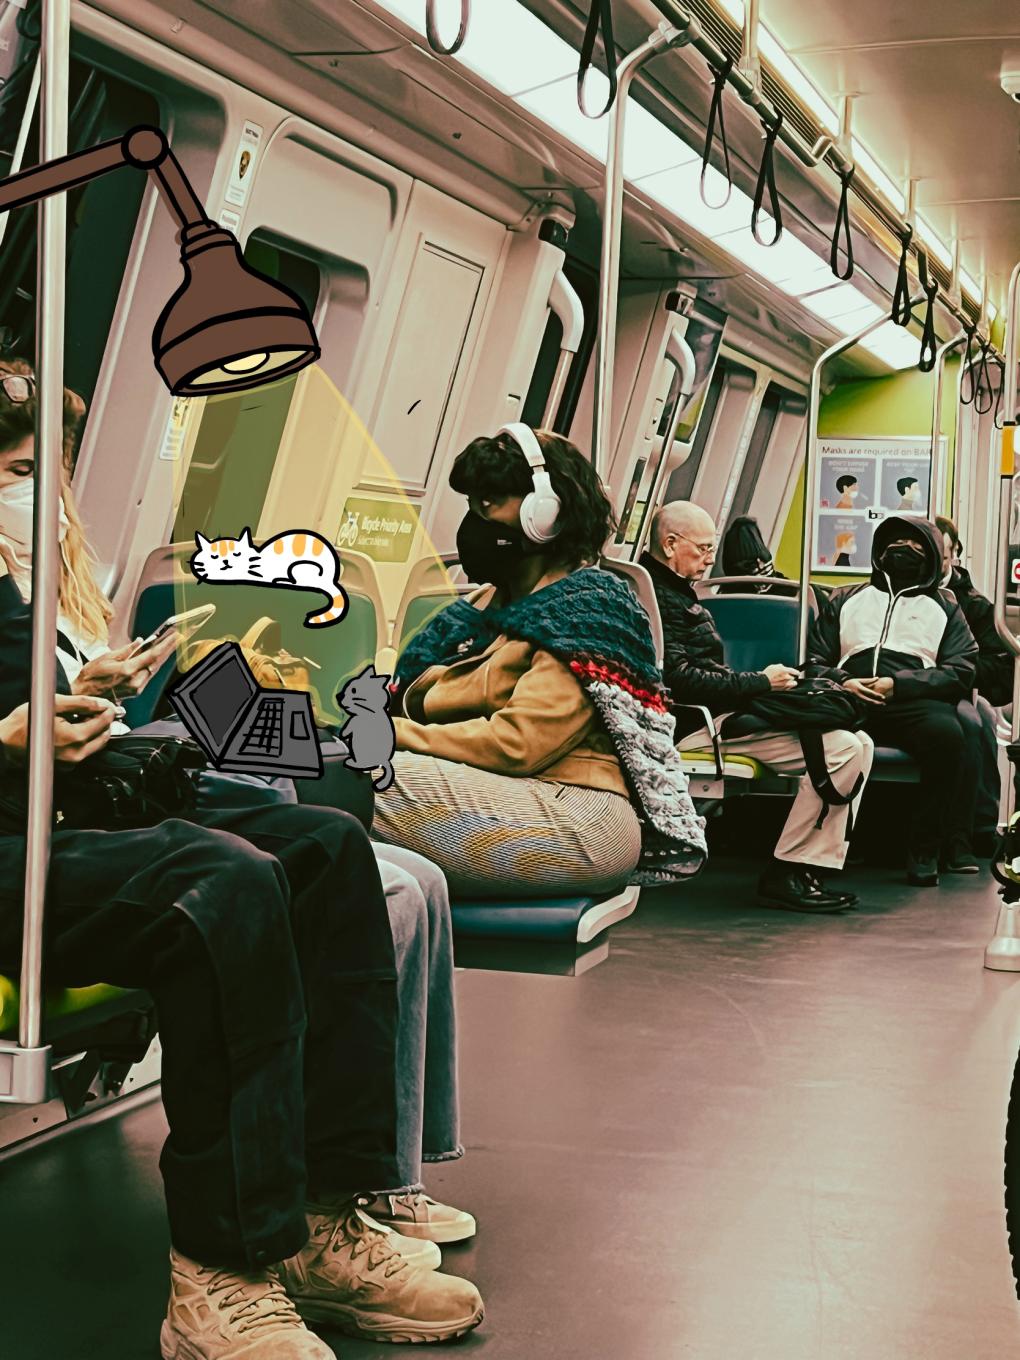 Photo of a BART train with a cat sleeping under  lamp illustration